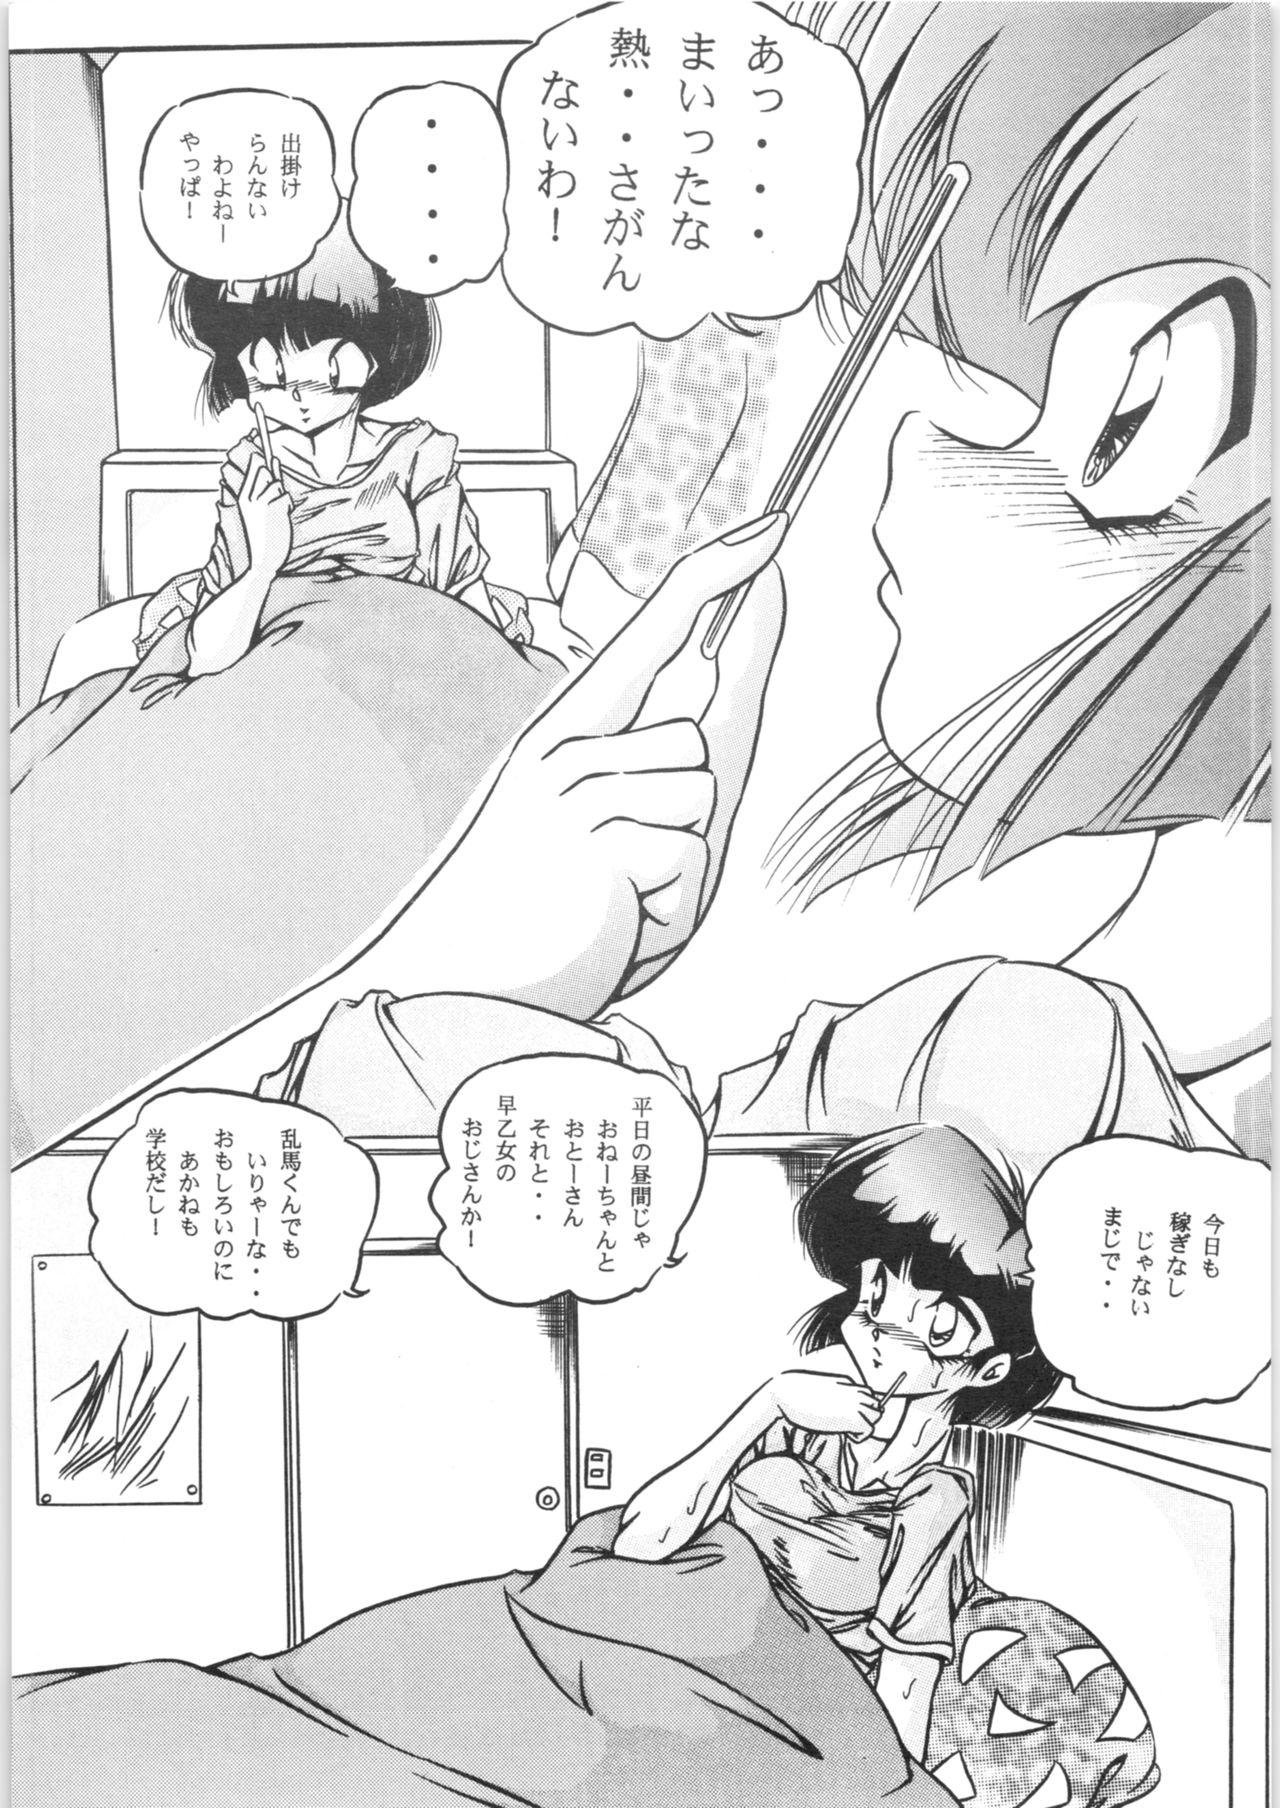 Sologirl C-COMPANY SPECIAL STAGE 18 - Ranma 12 Idol project Hot Whores - Page 8